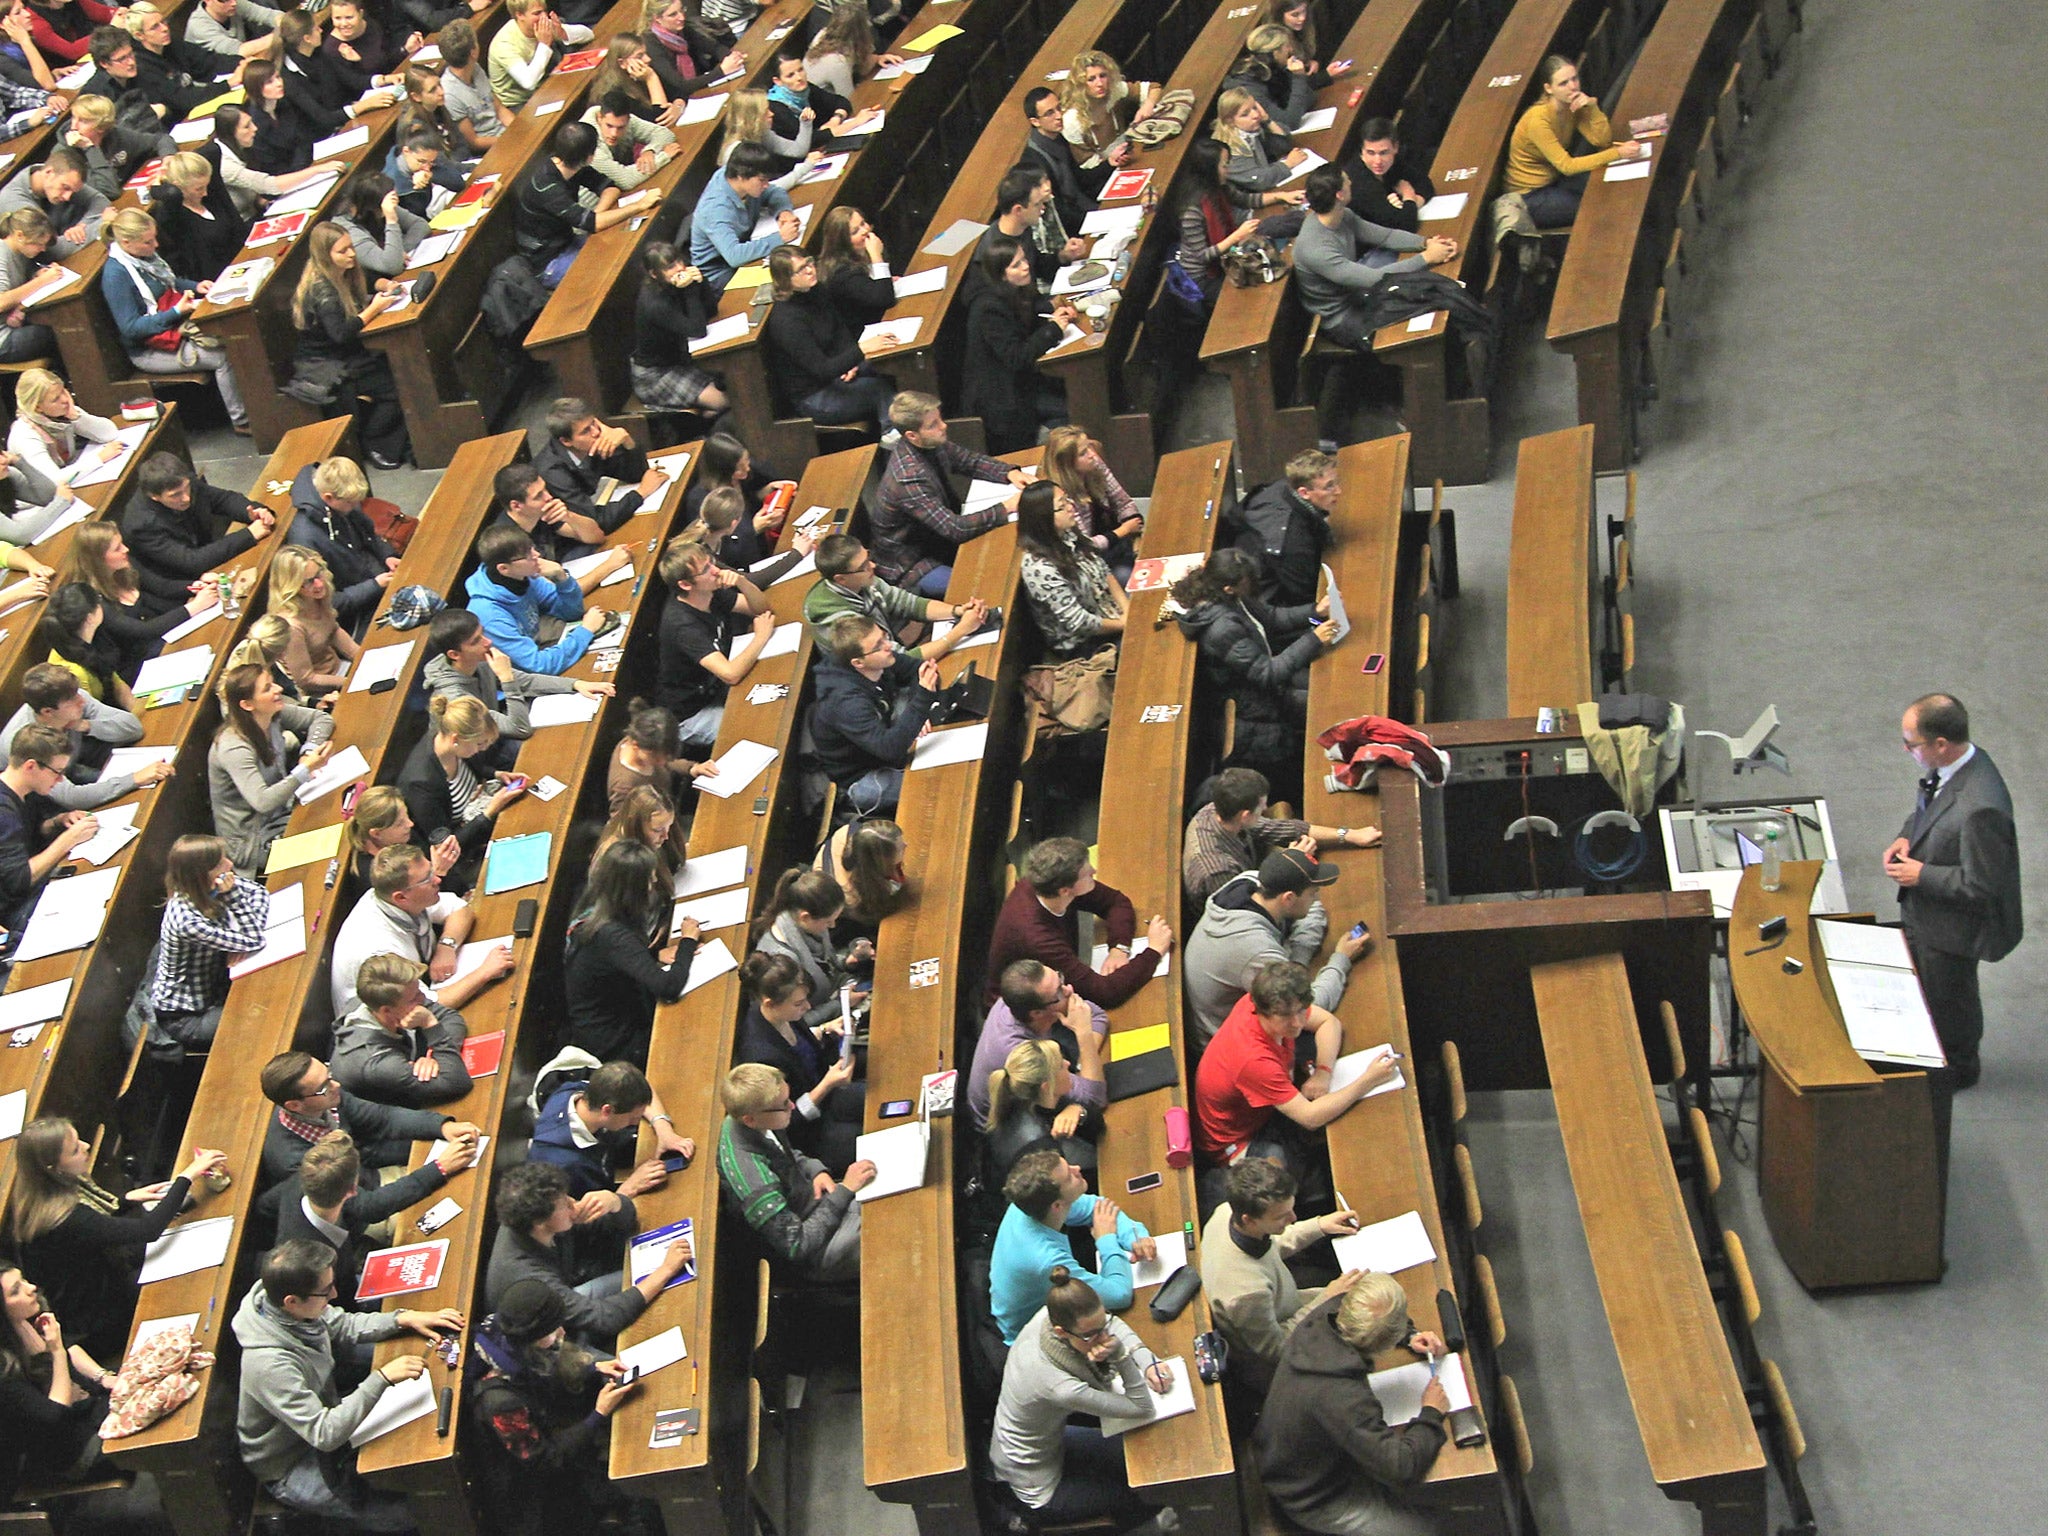 Students attend a lecture at the Ludwig Maximilians university in Munich, Germany